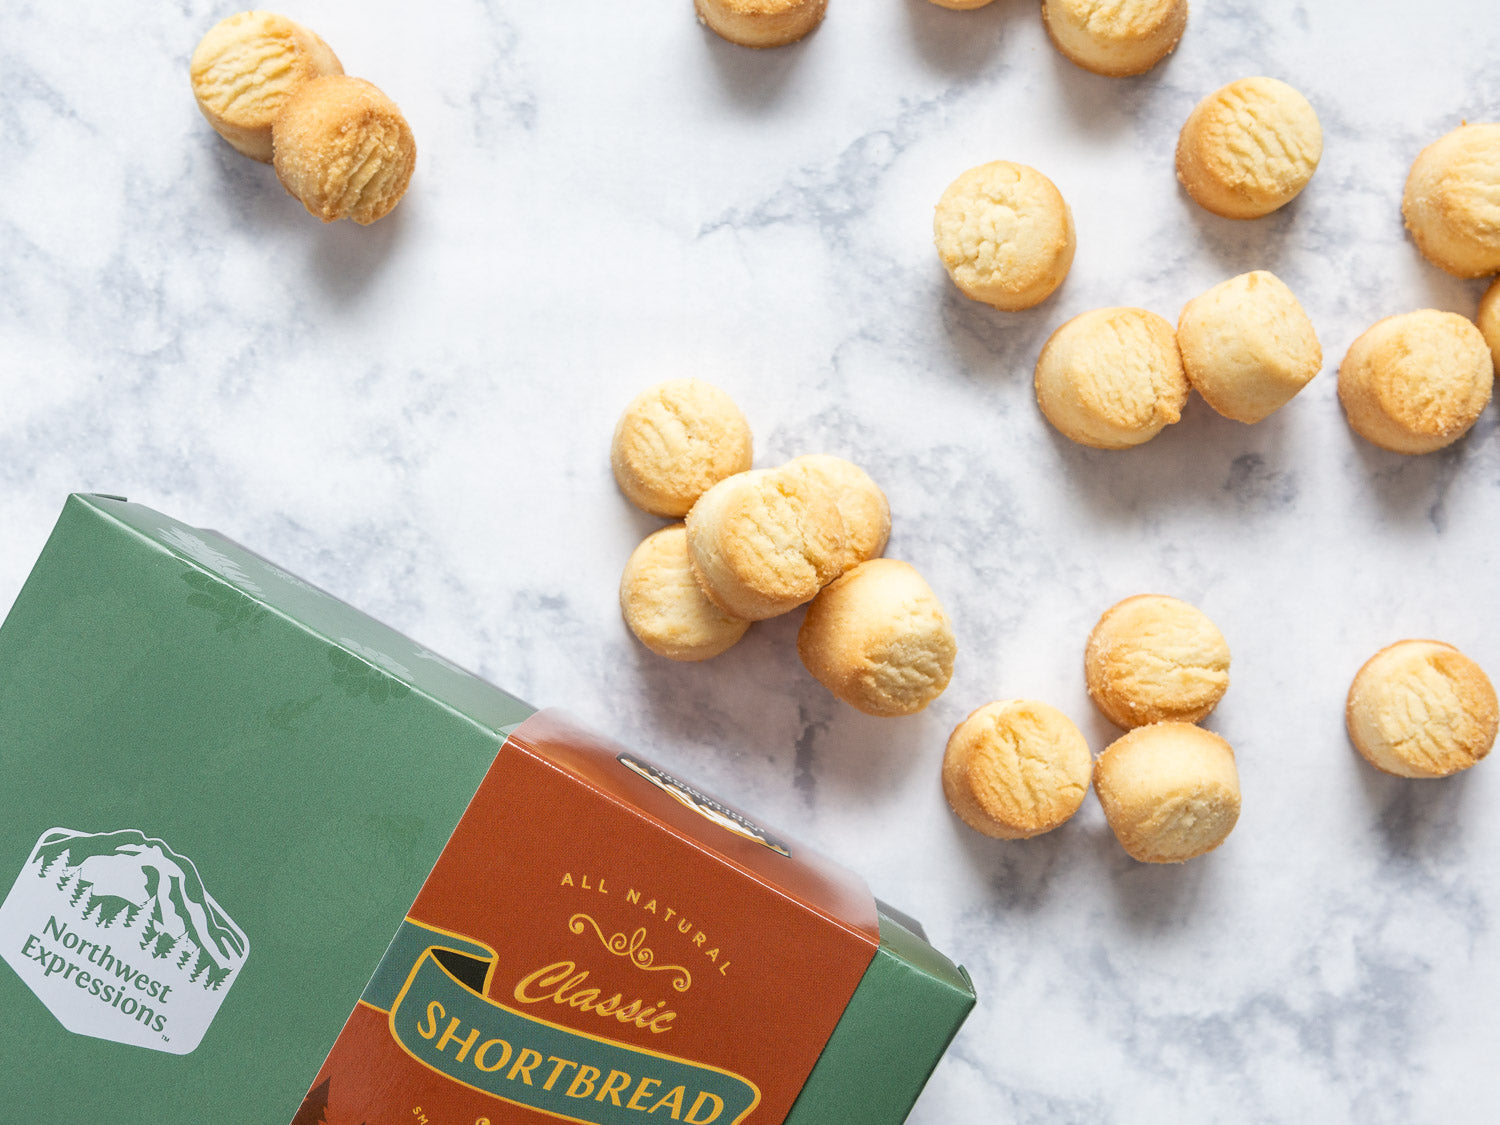 classic shortbread scattered across a marble countertop beside the gift box